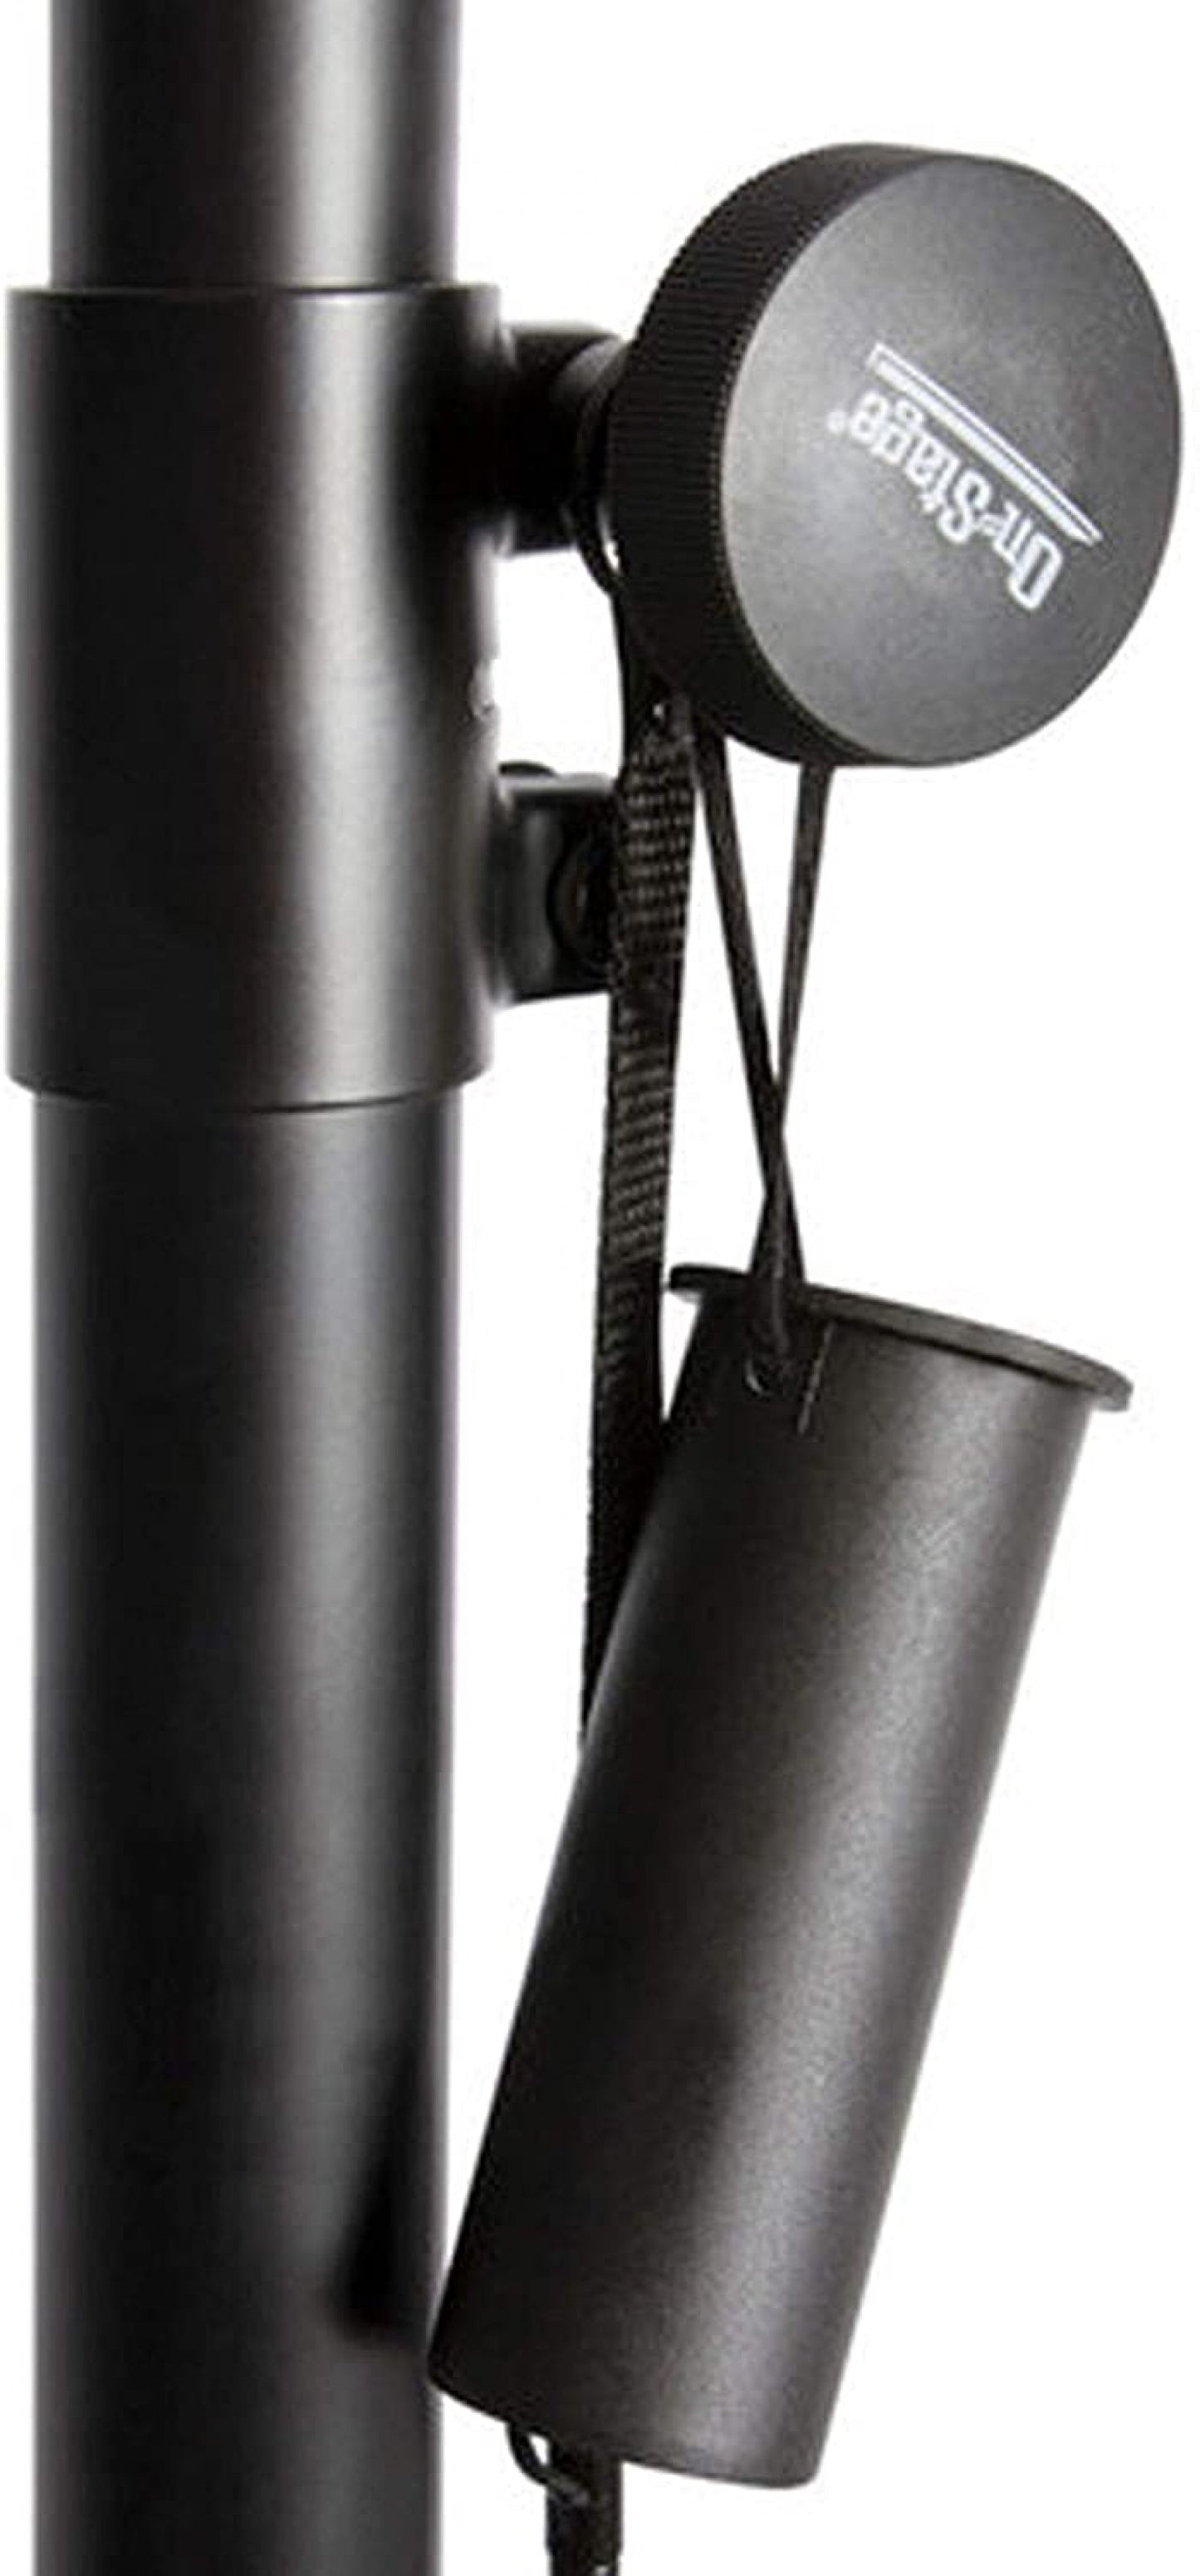 On Stage SS7725 Tripod Speaker Stand